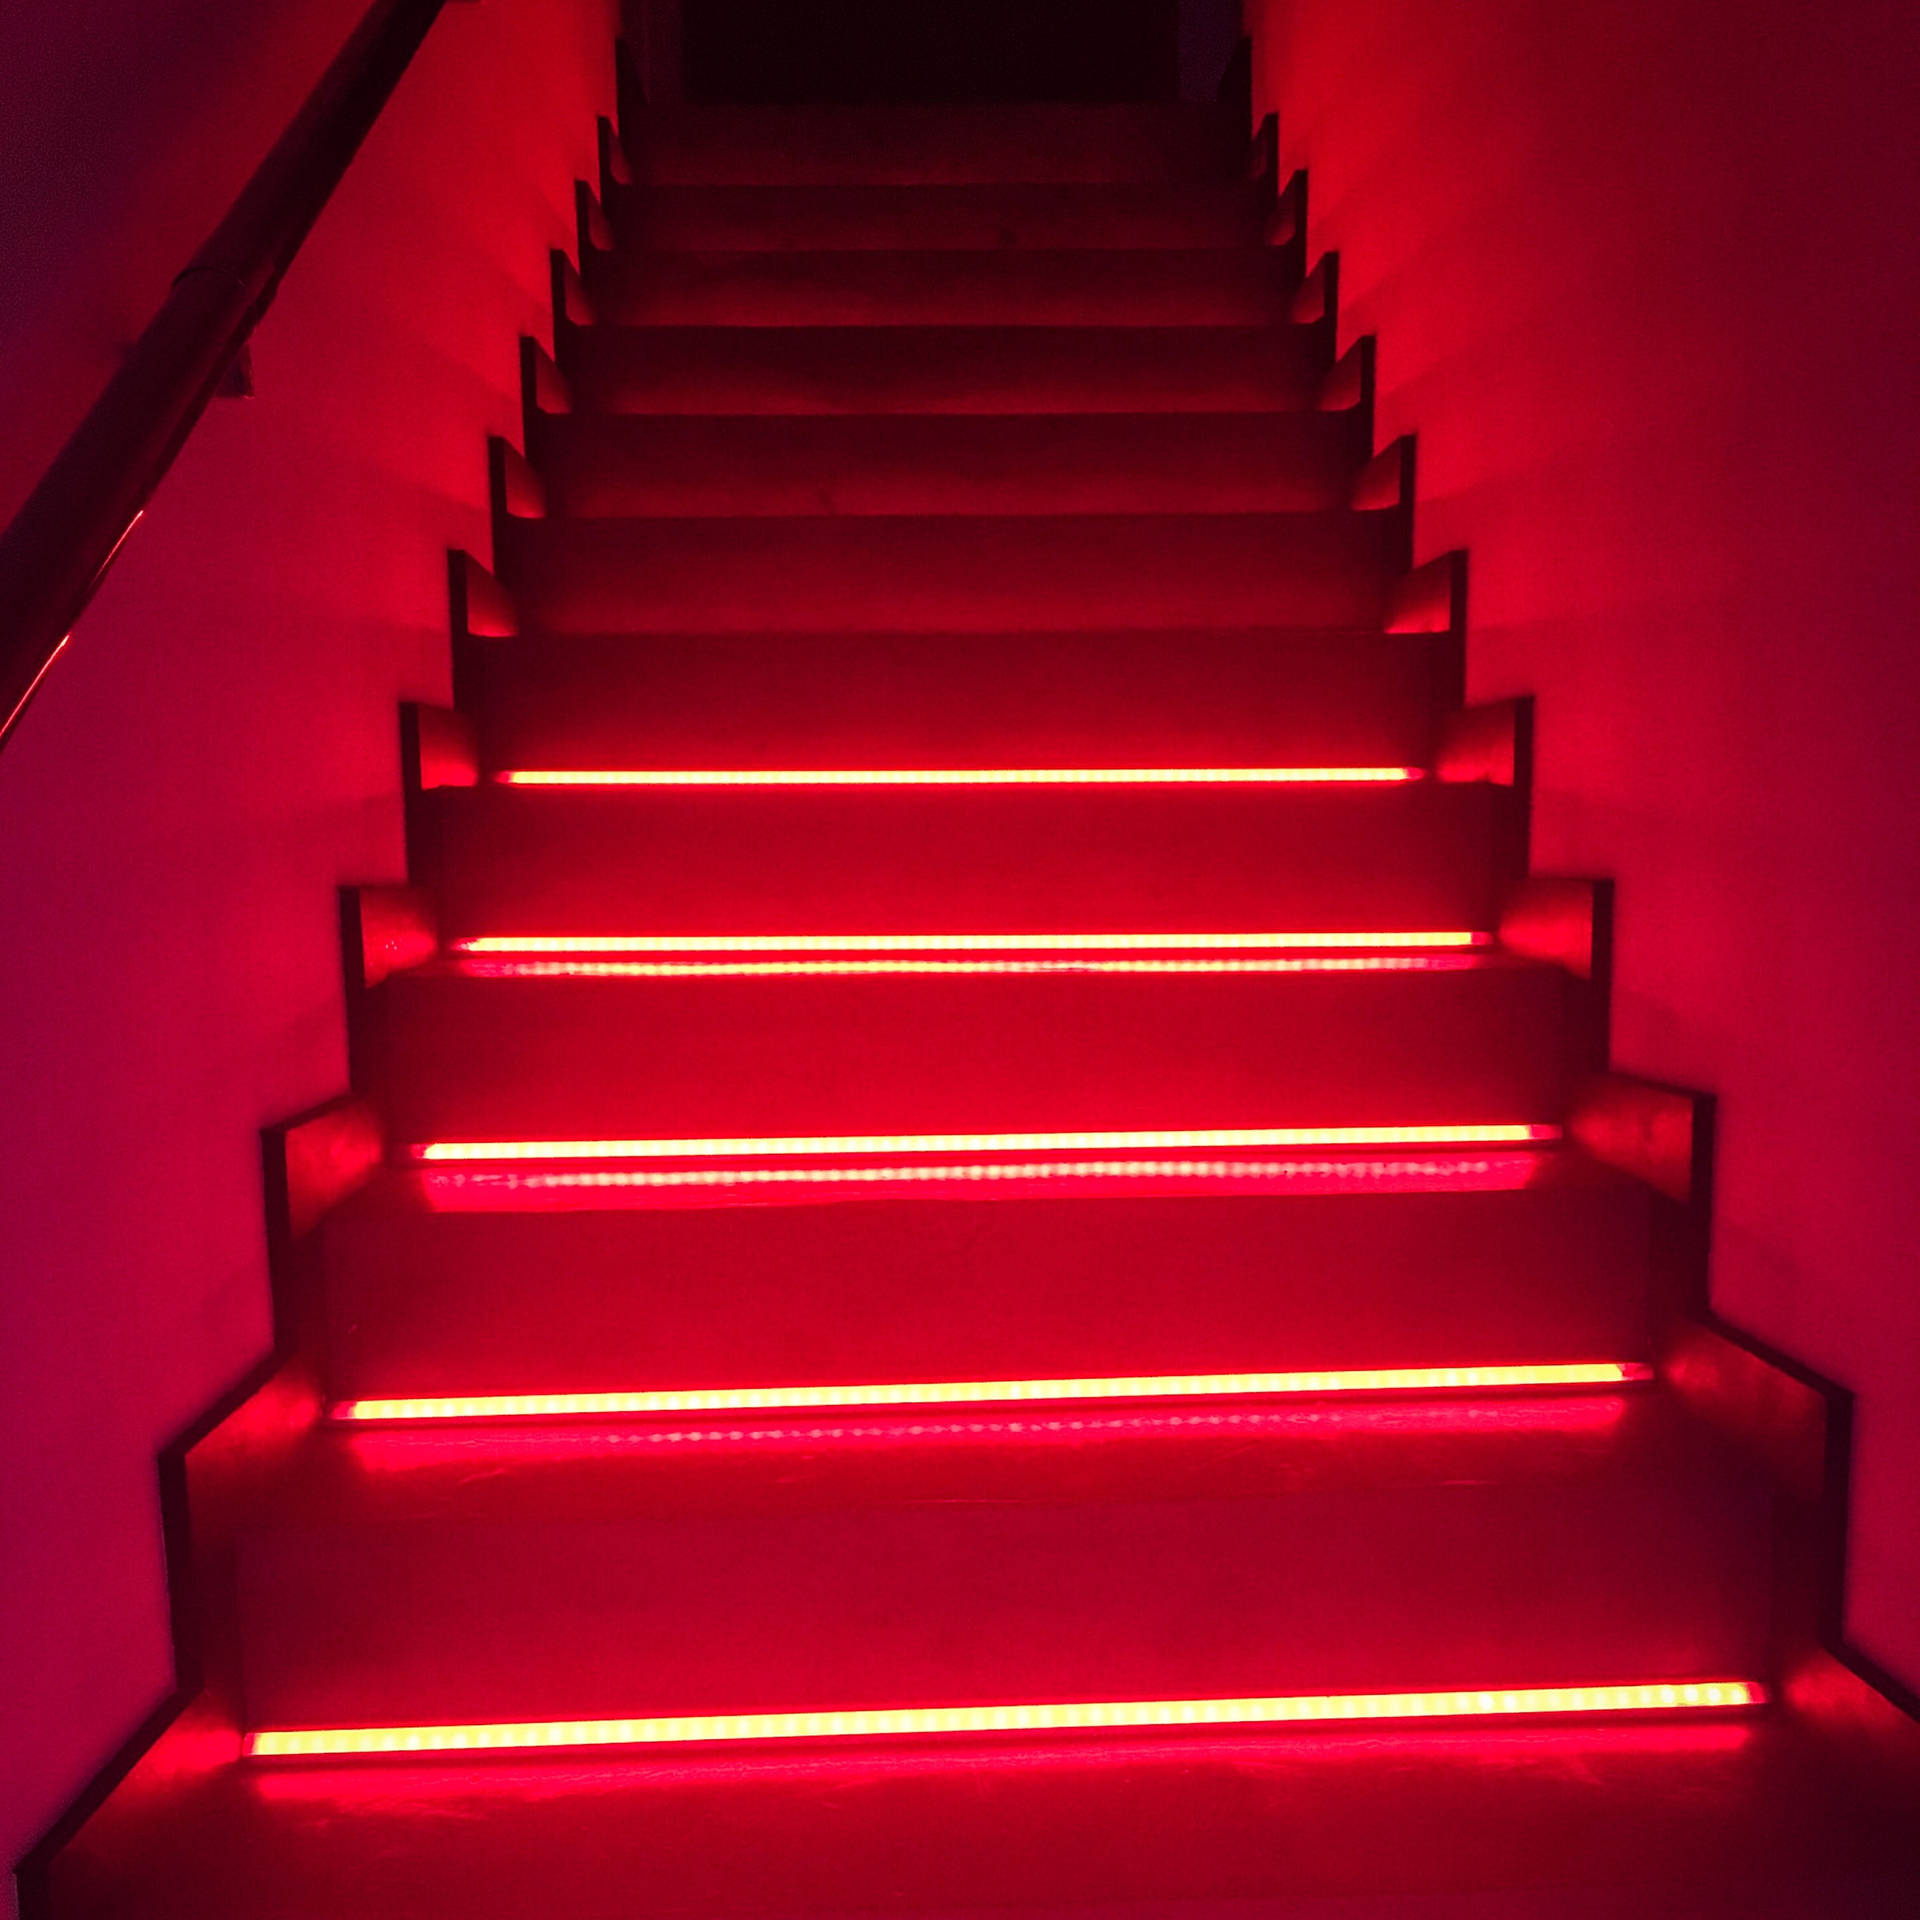 Red Aesthetic Neon Stair Lights Background